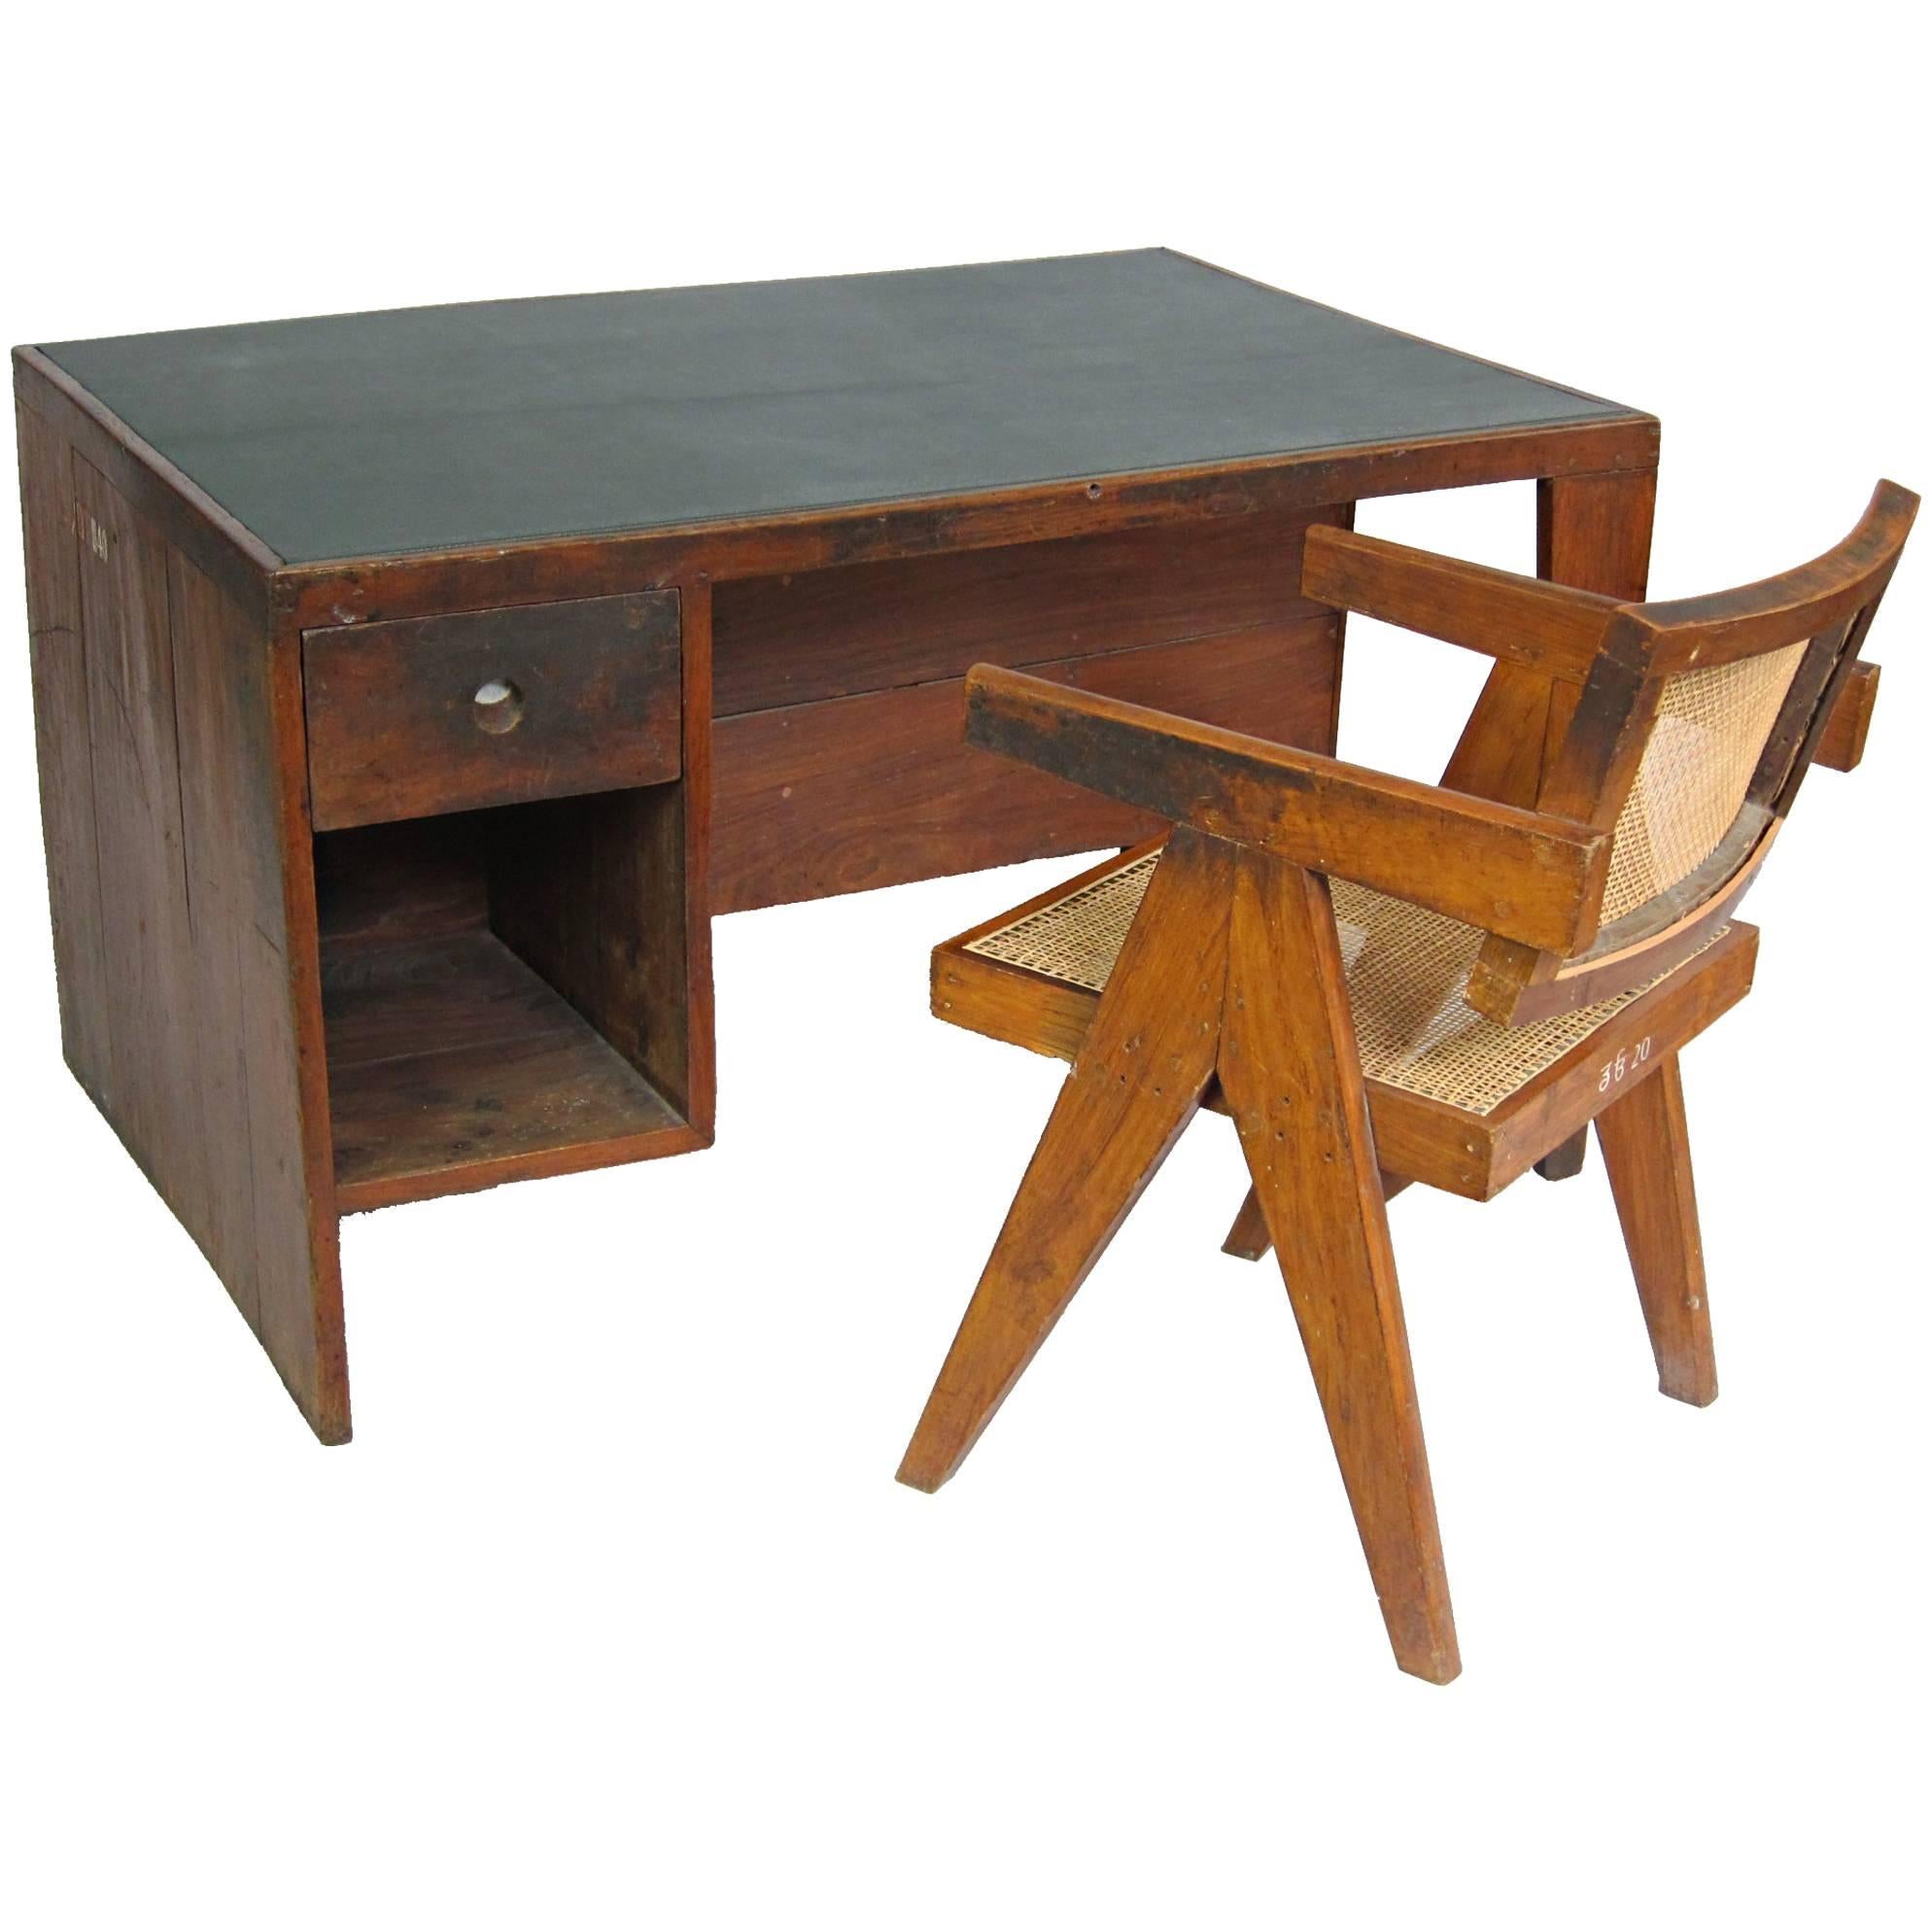 Pierre Jeanneret Marked Chandigarh Desk and Armchair For Sale